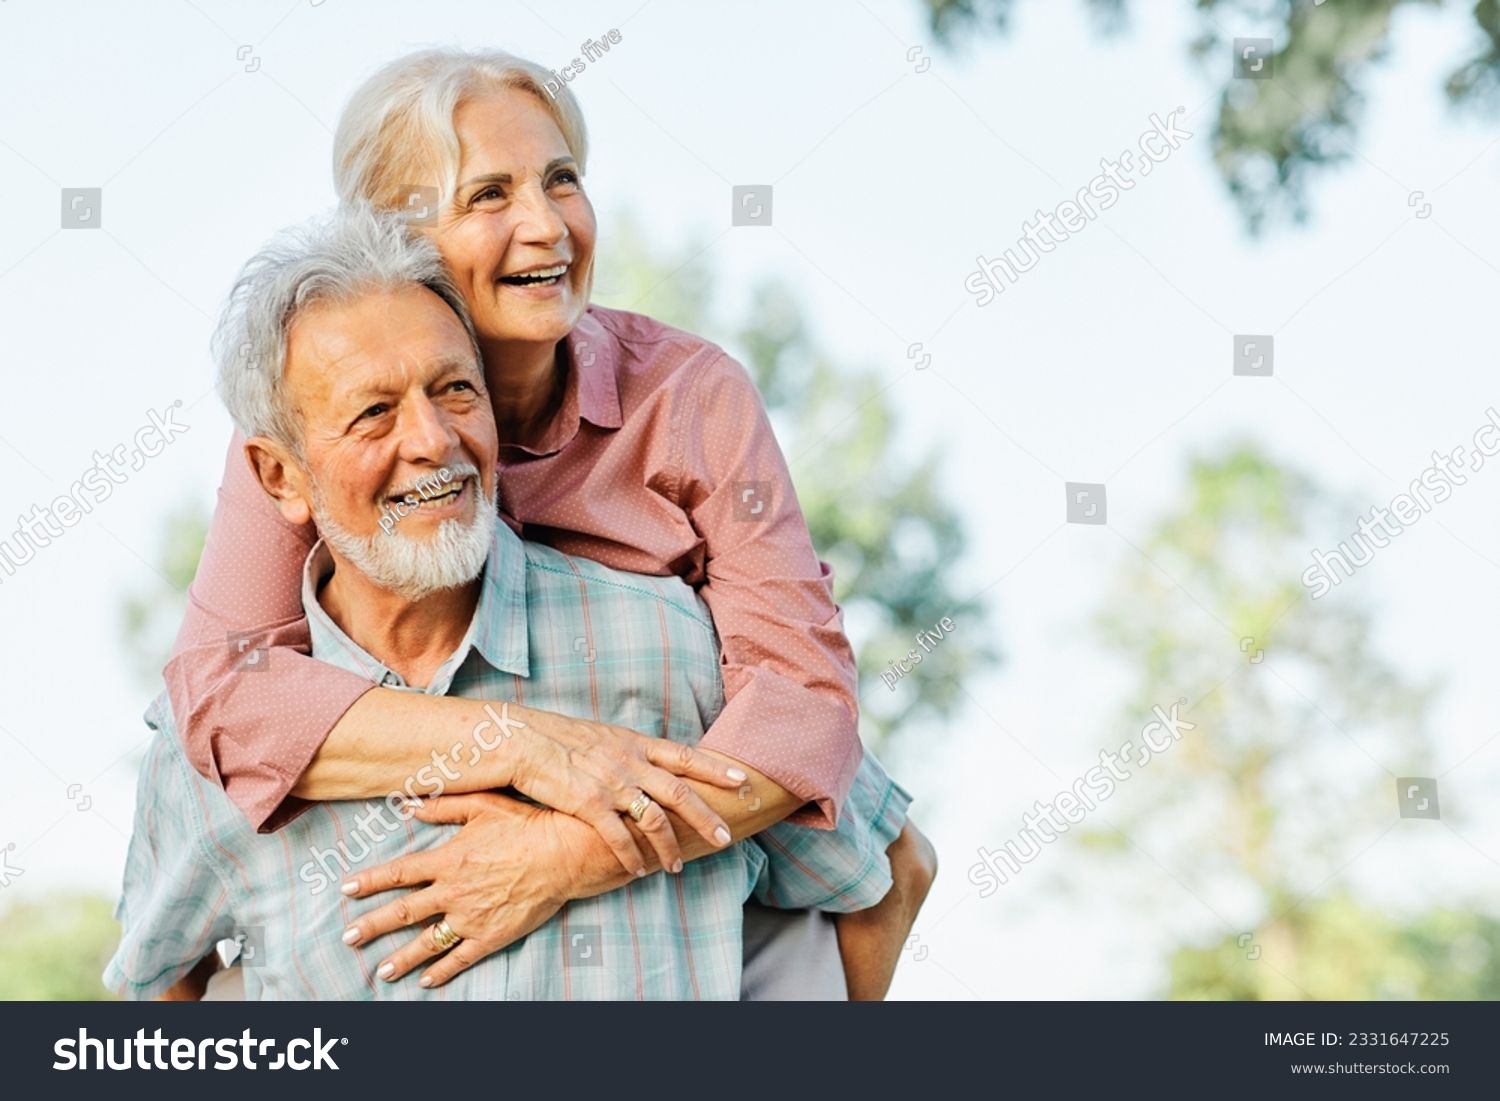 Happy active senior couple having fun outdoors. Portrait of an elderly couple together #2331647225